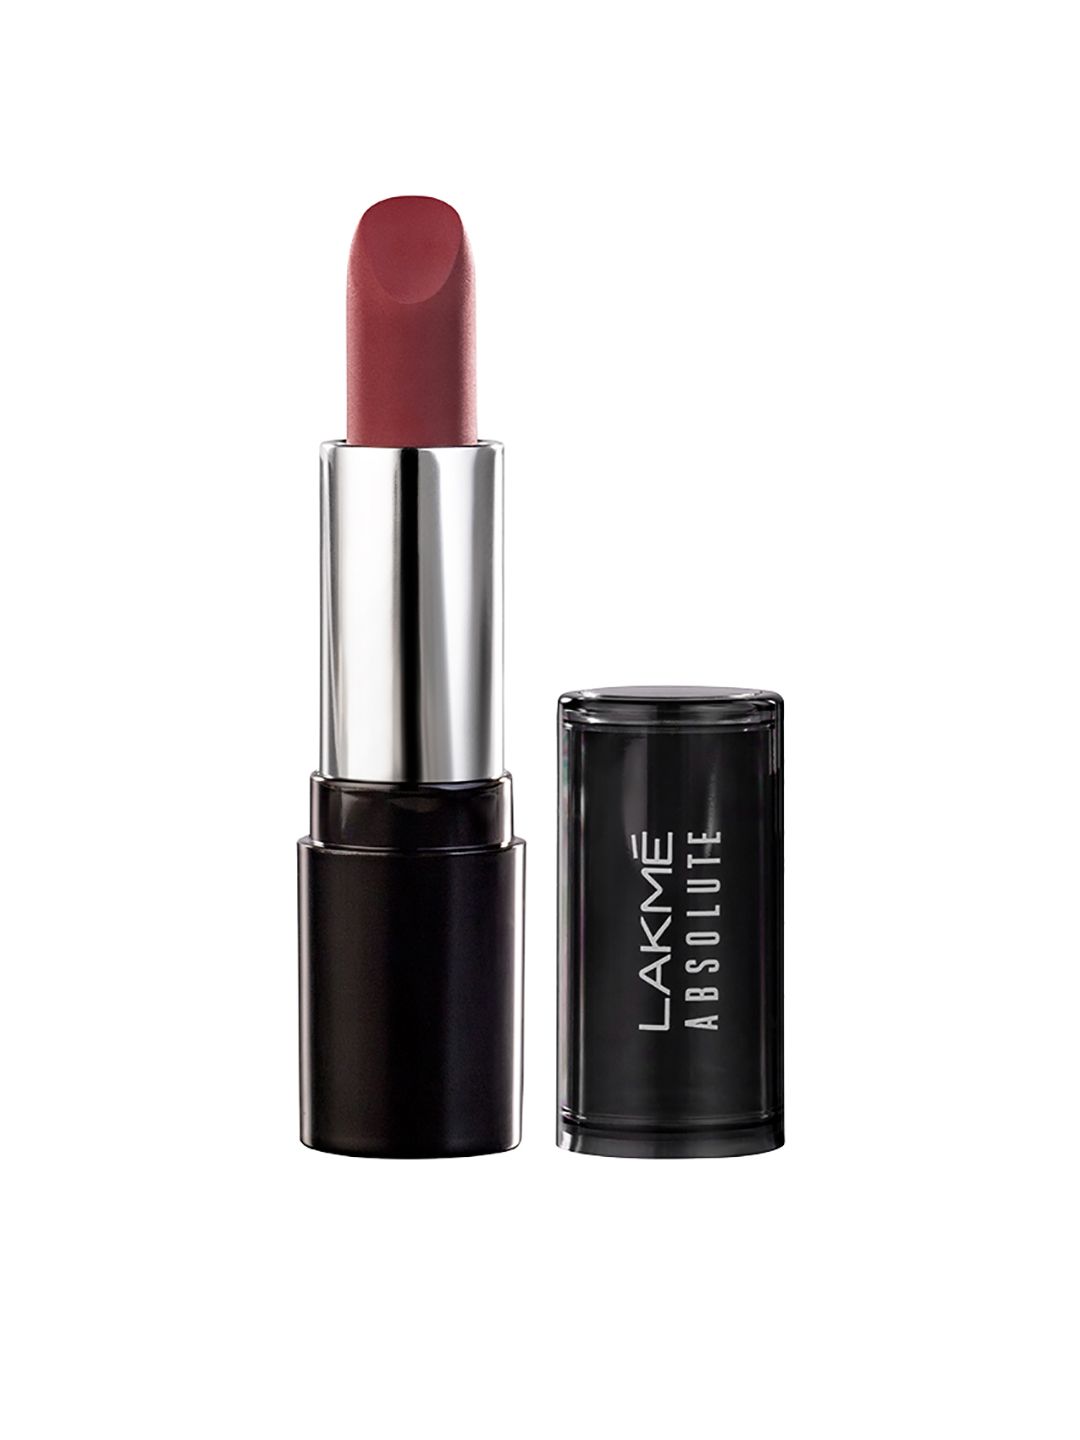 Lakme Absolute Matte Revolution Lip Color - 306 Nutty Chocolate 3.5g Price in India